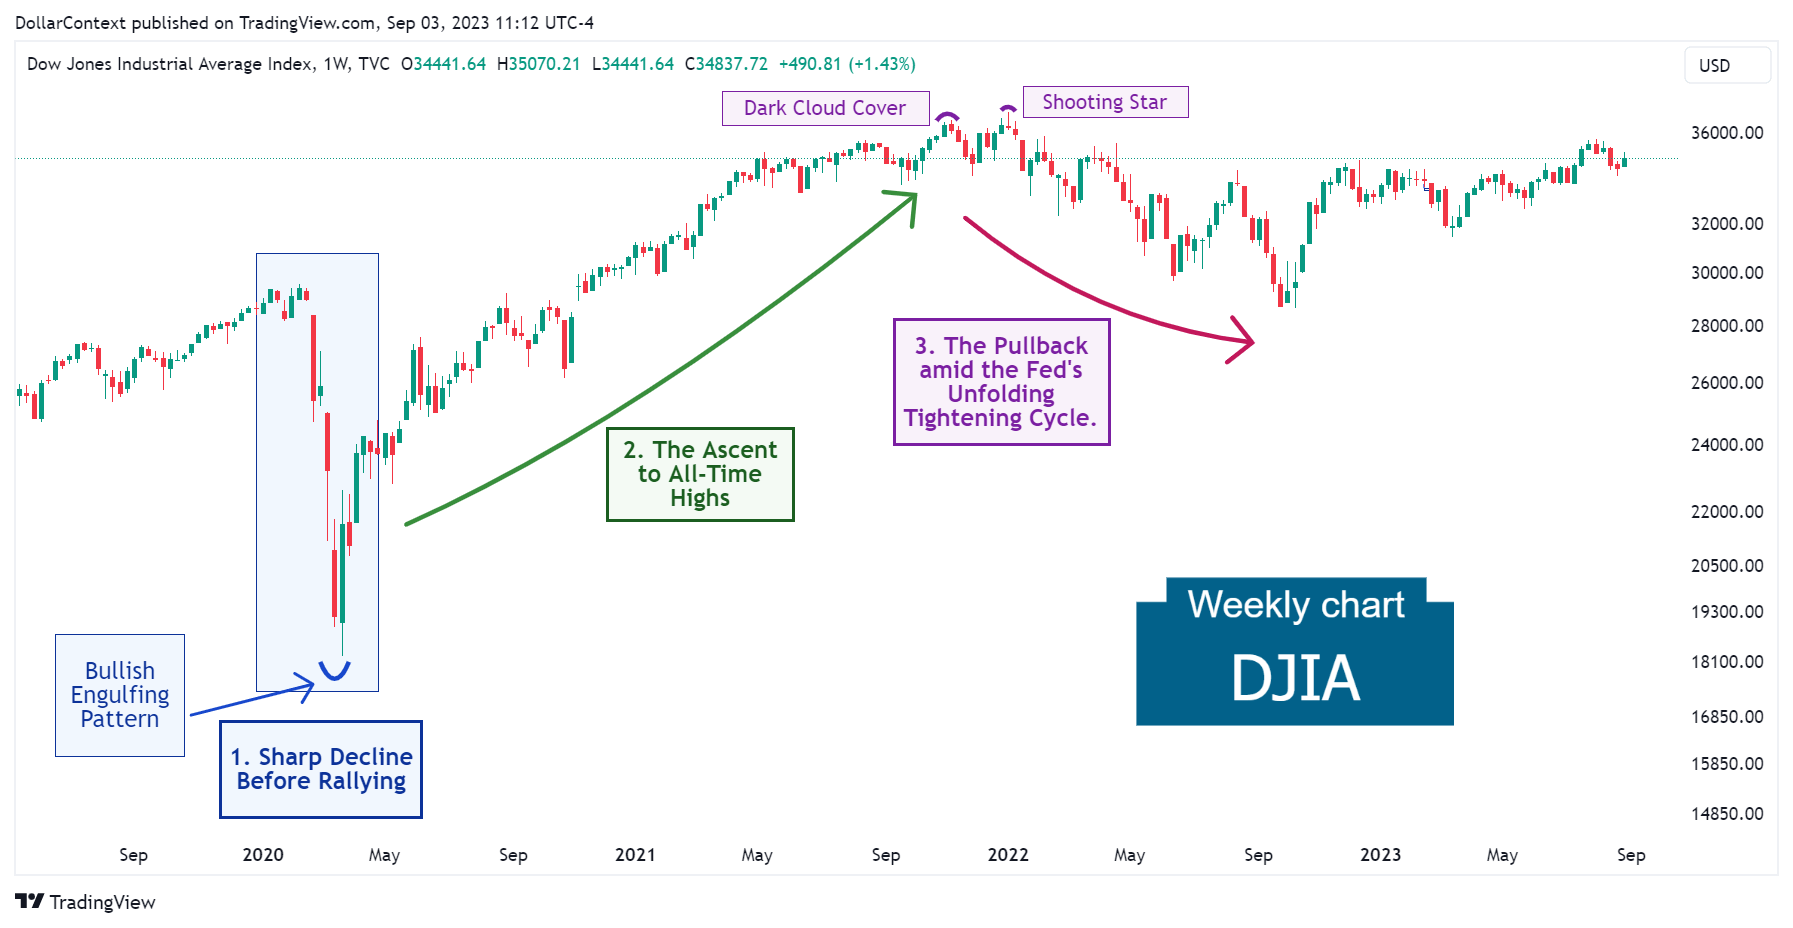 DJIA: The Correction from February 2022 to September 2022 (Weekly Chart)